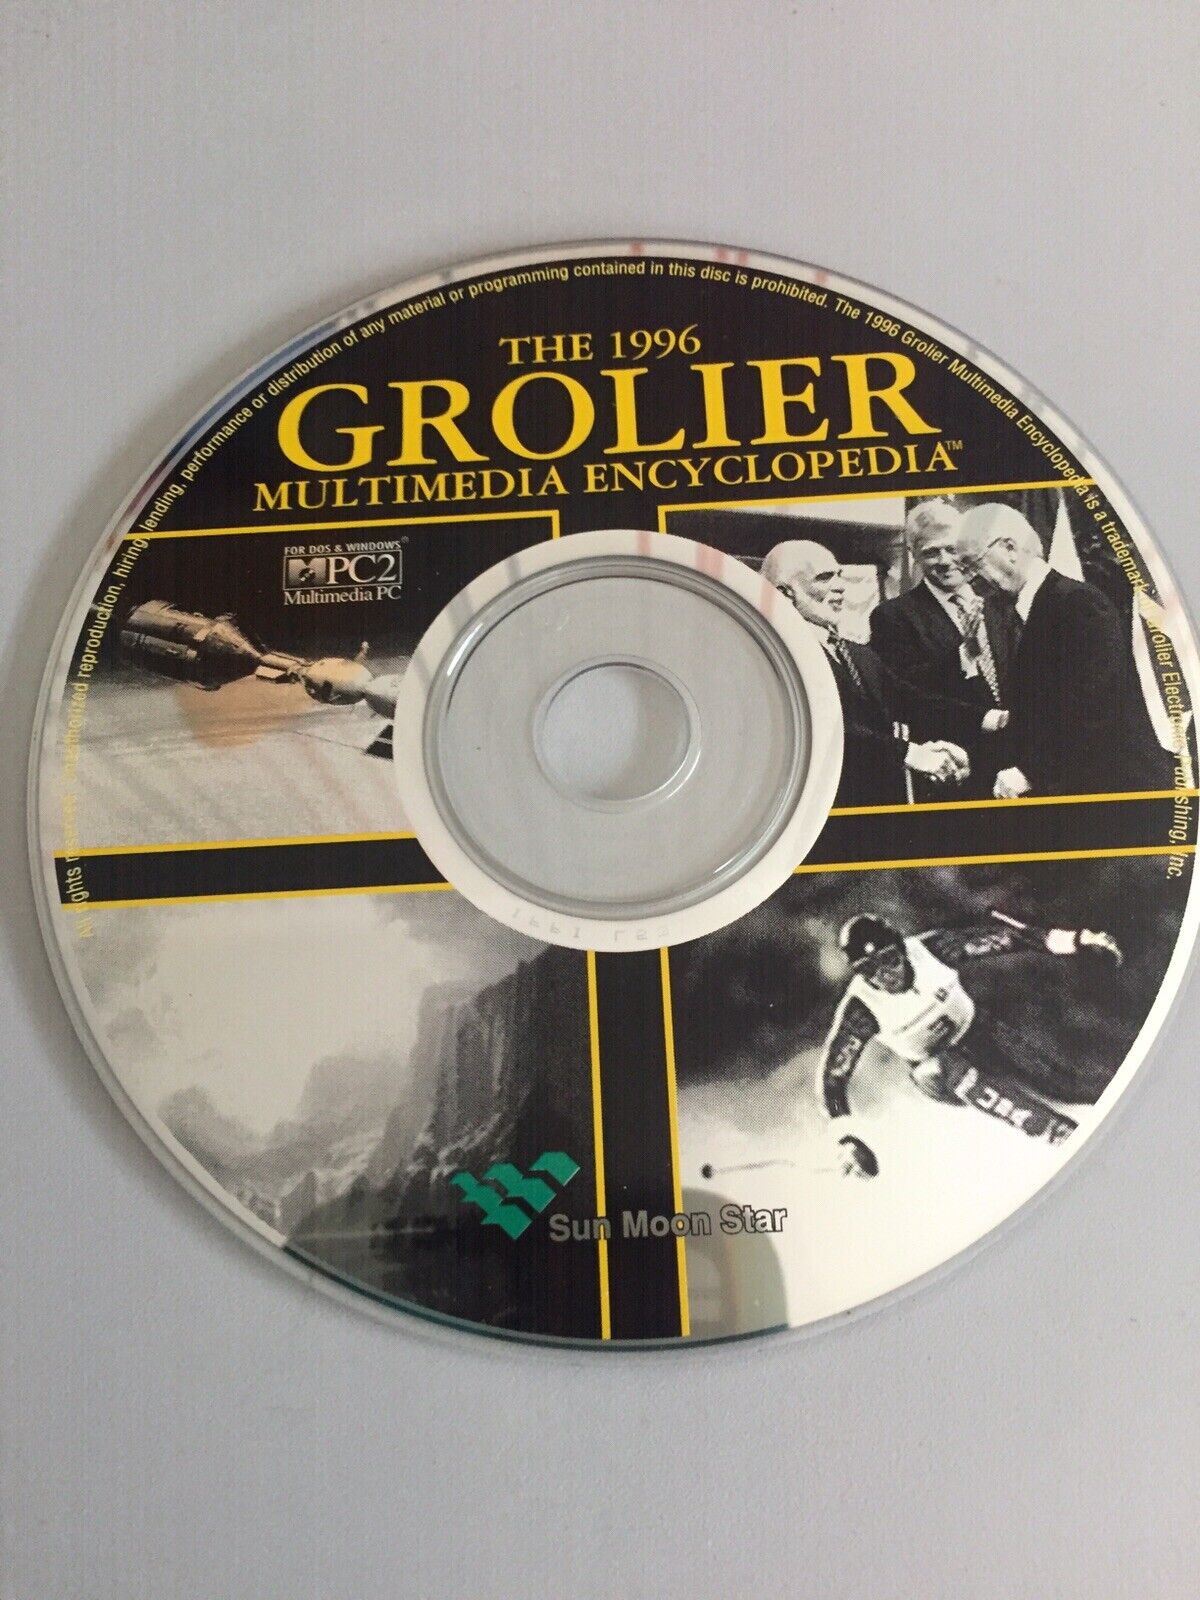 1996 Grolier Multimedia Encyclopedia CD ROM For DOS and Windows